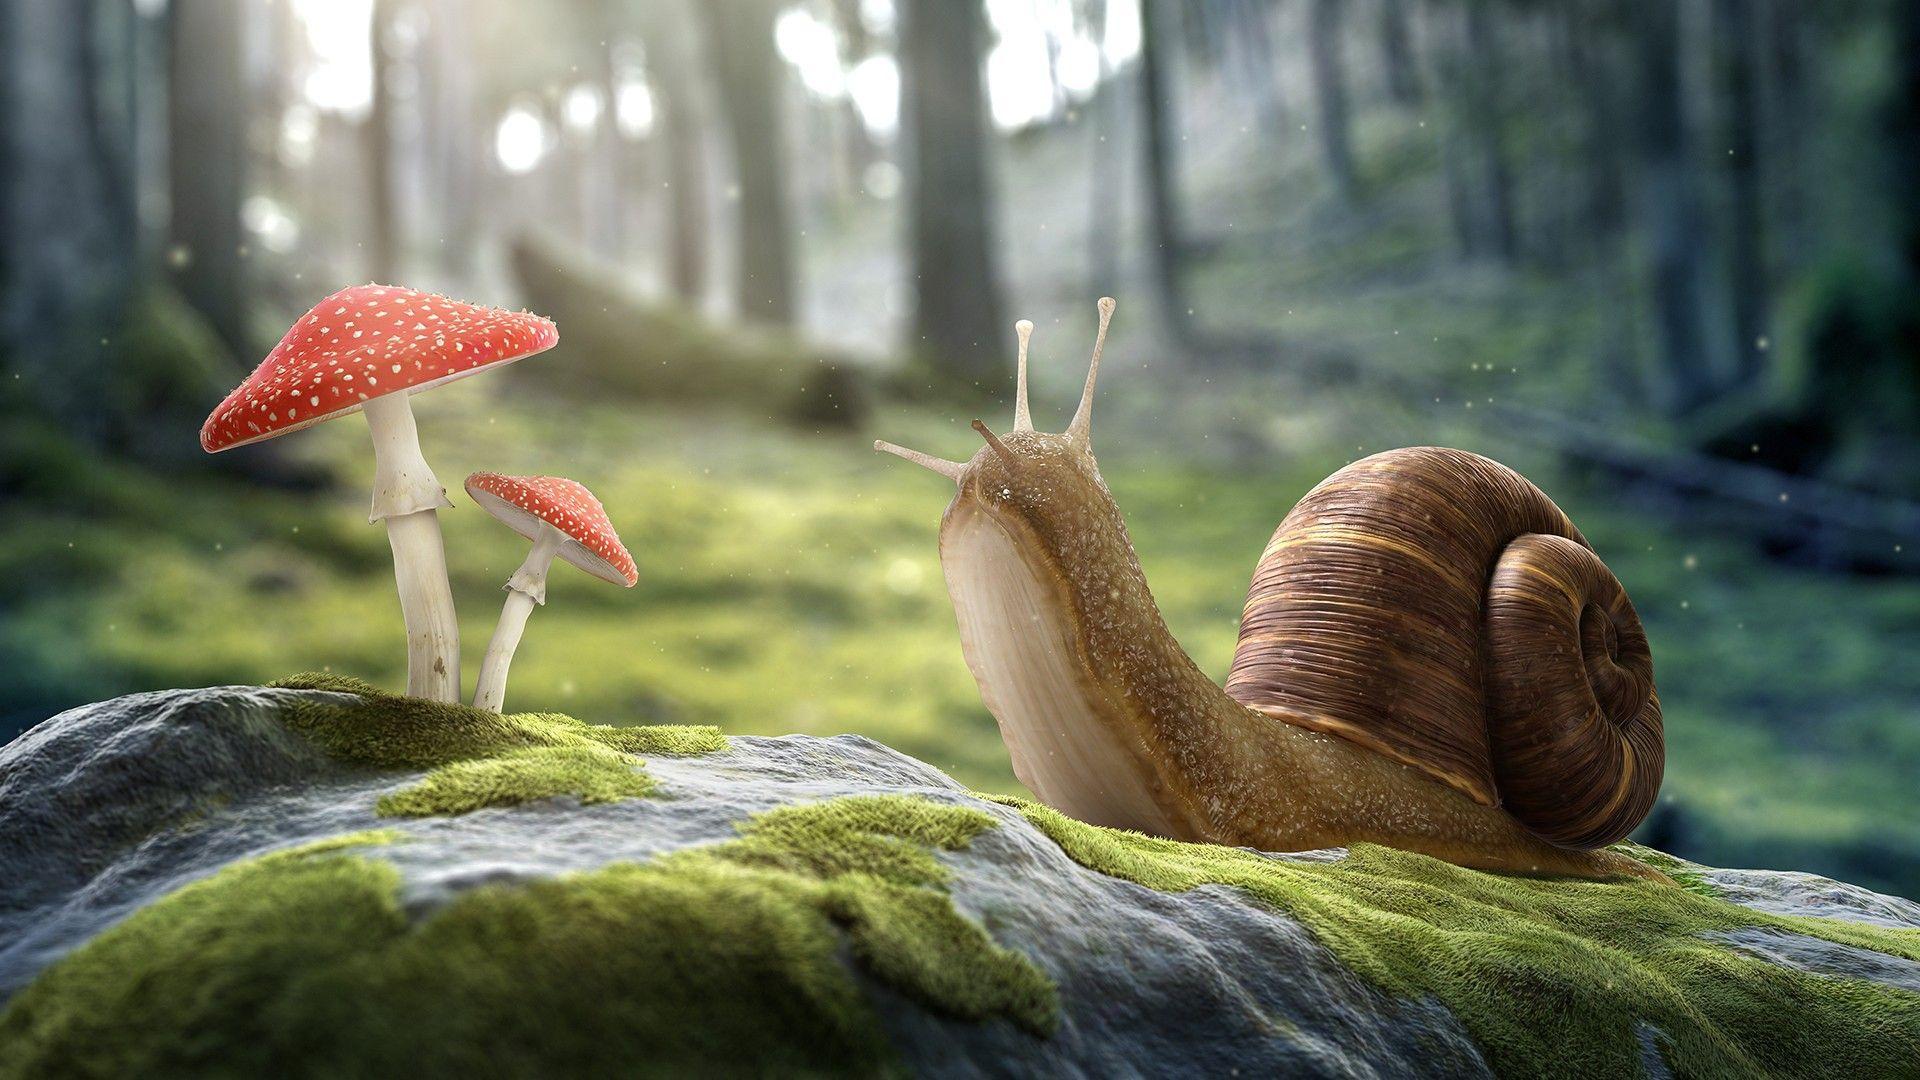 Snail on a stone and fly agaric wallpaper and image